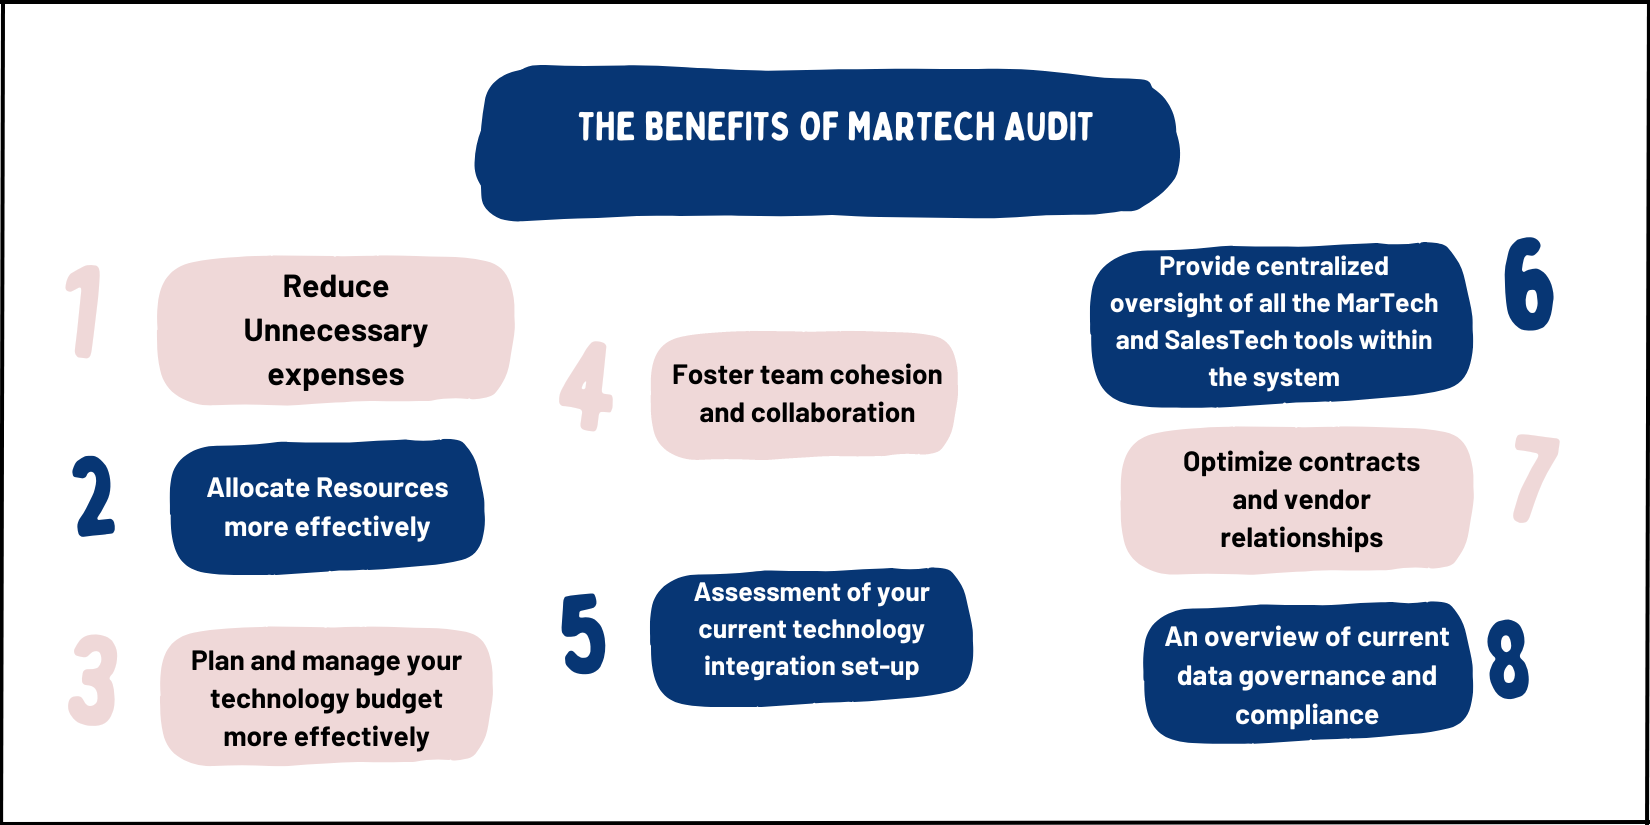 THE BENEFITS OF MARTECH AUDIT